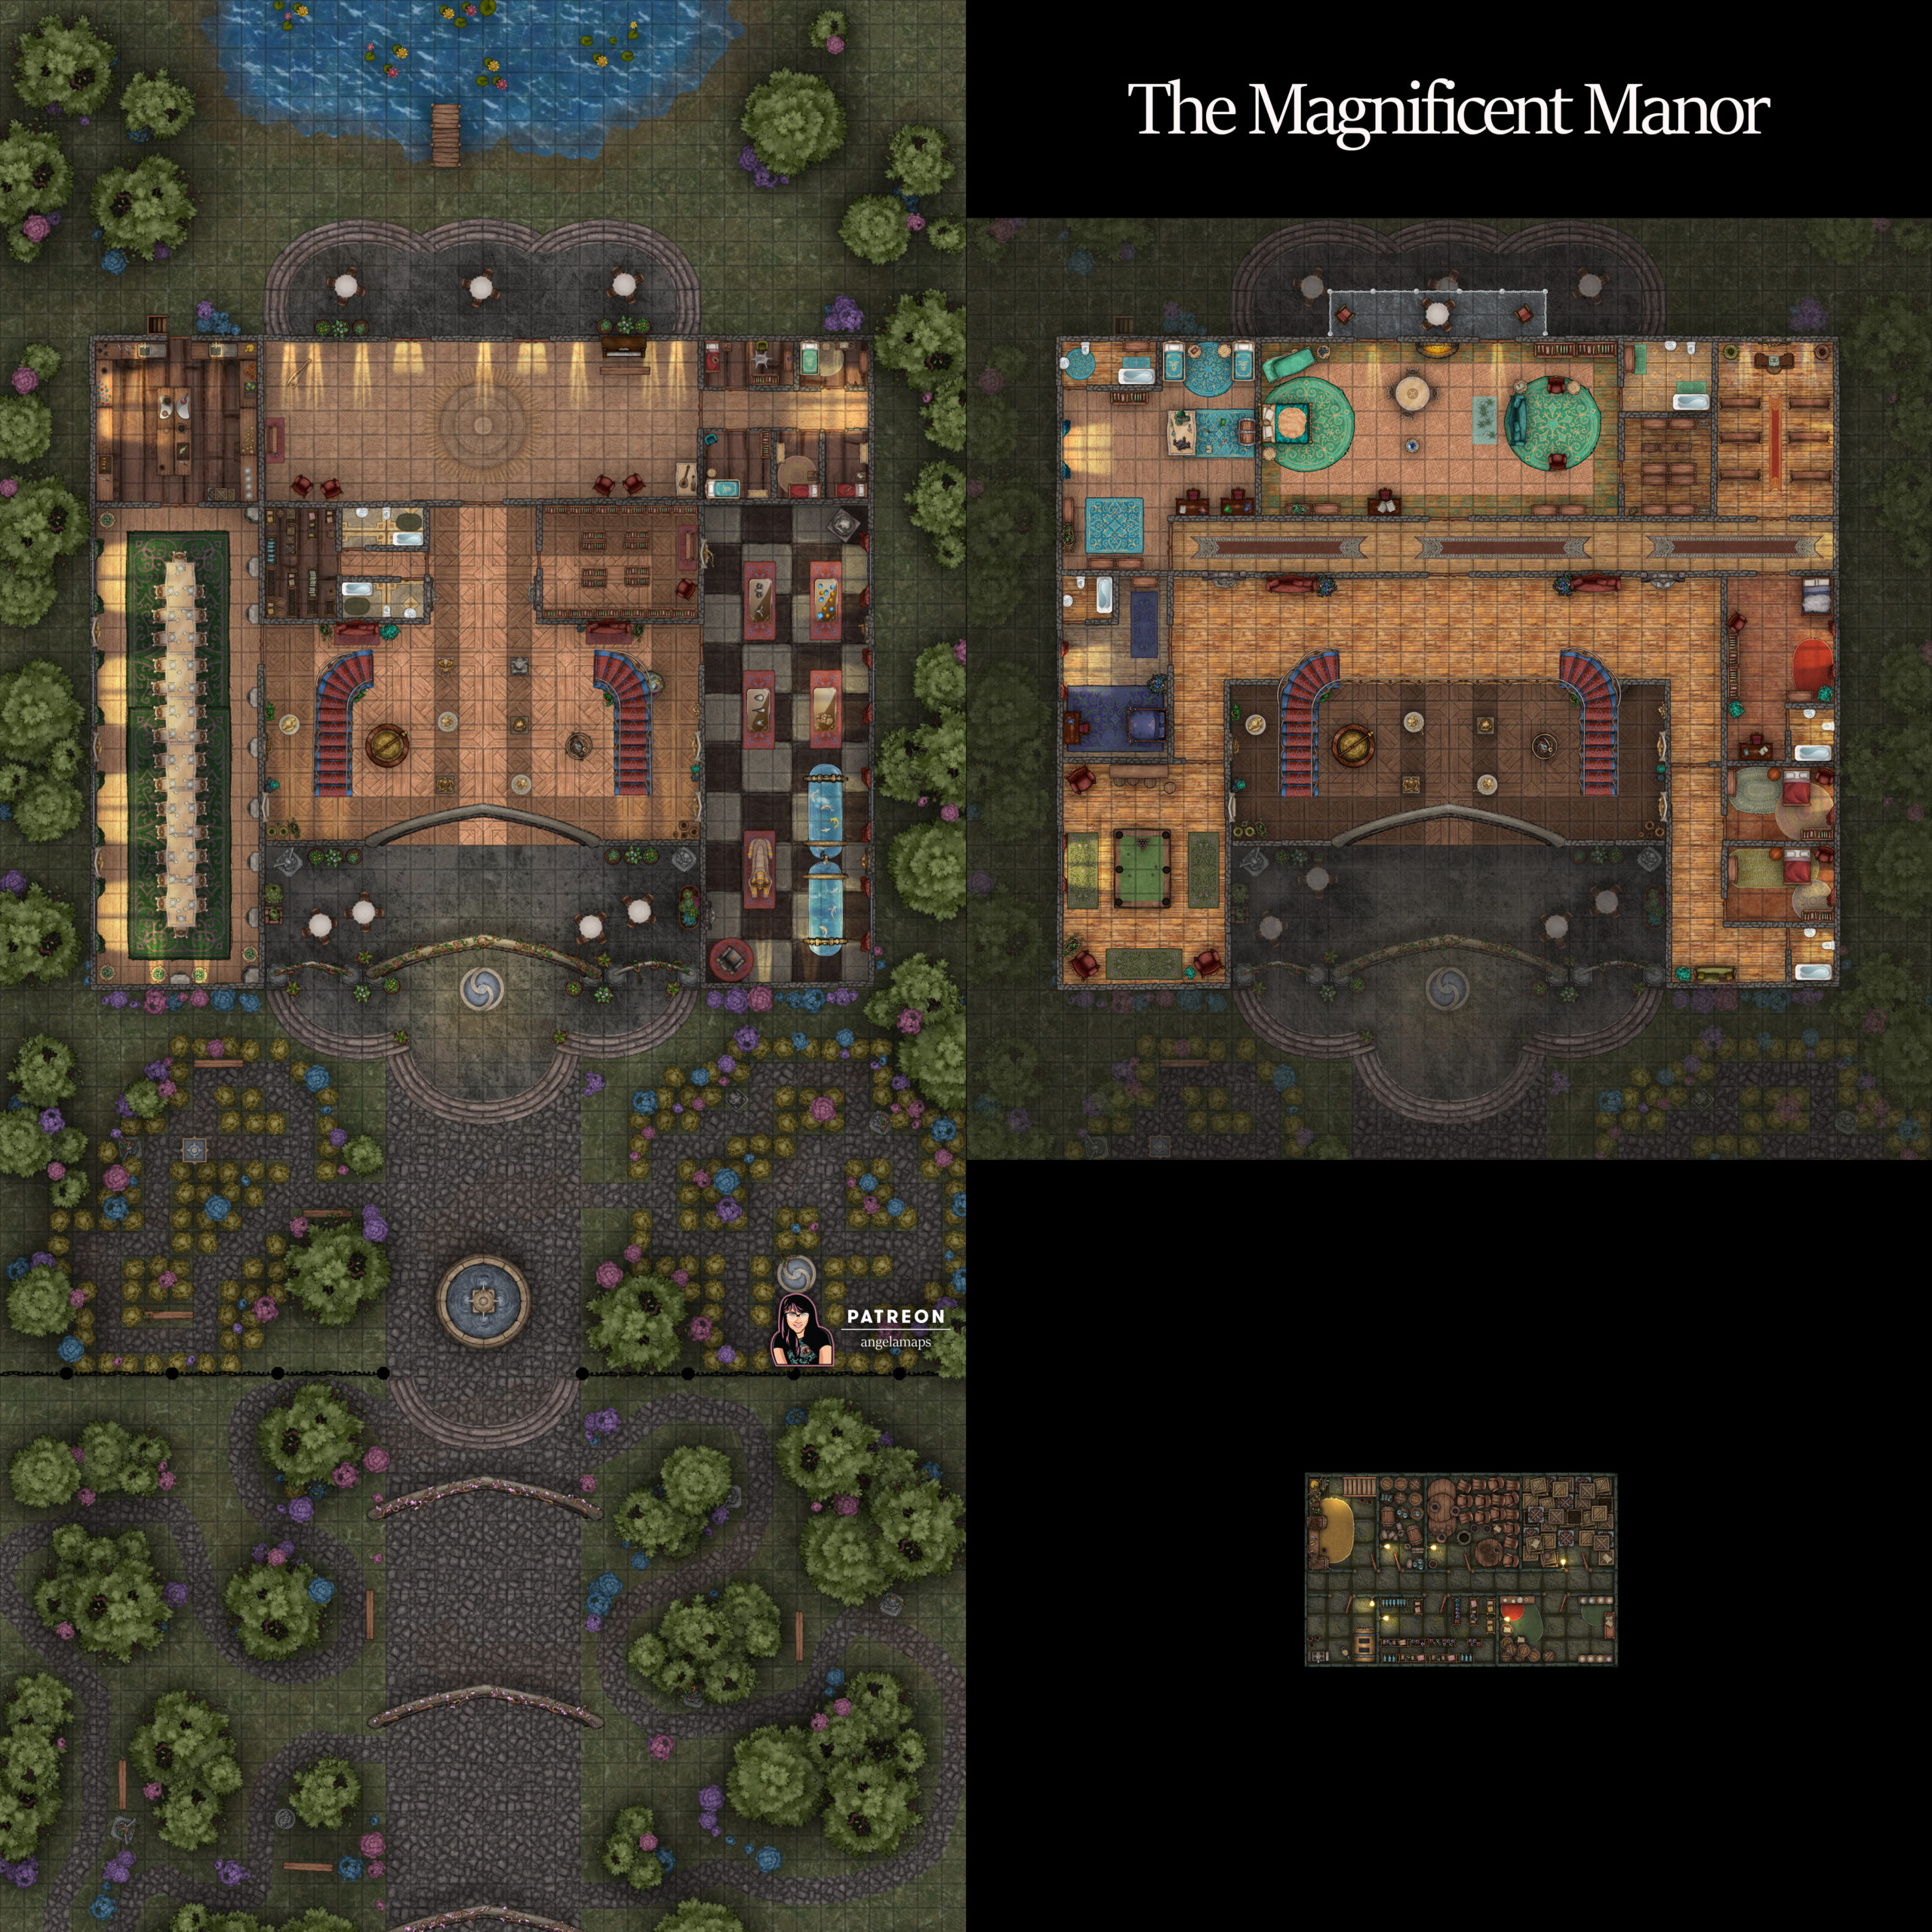 Huge manor house and grounds battle map encounter for D&D or pathfinder TTRPGs